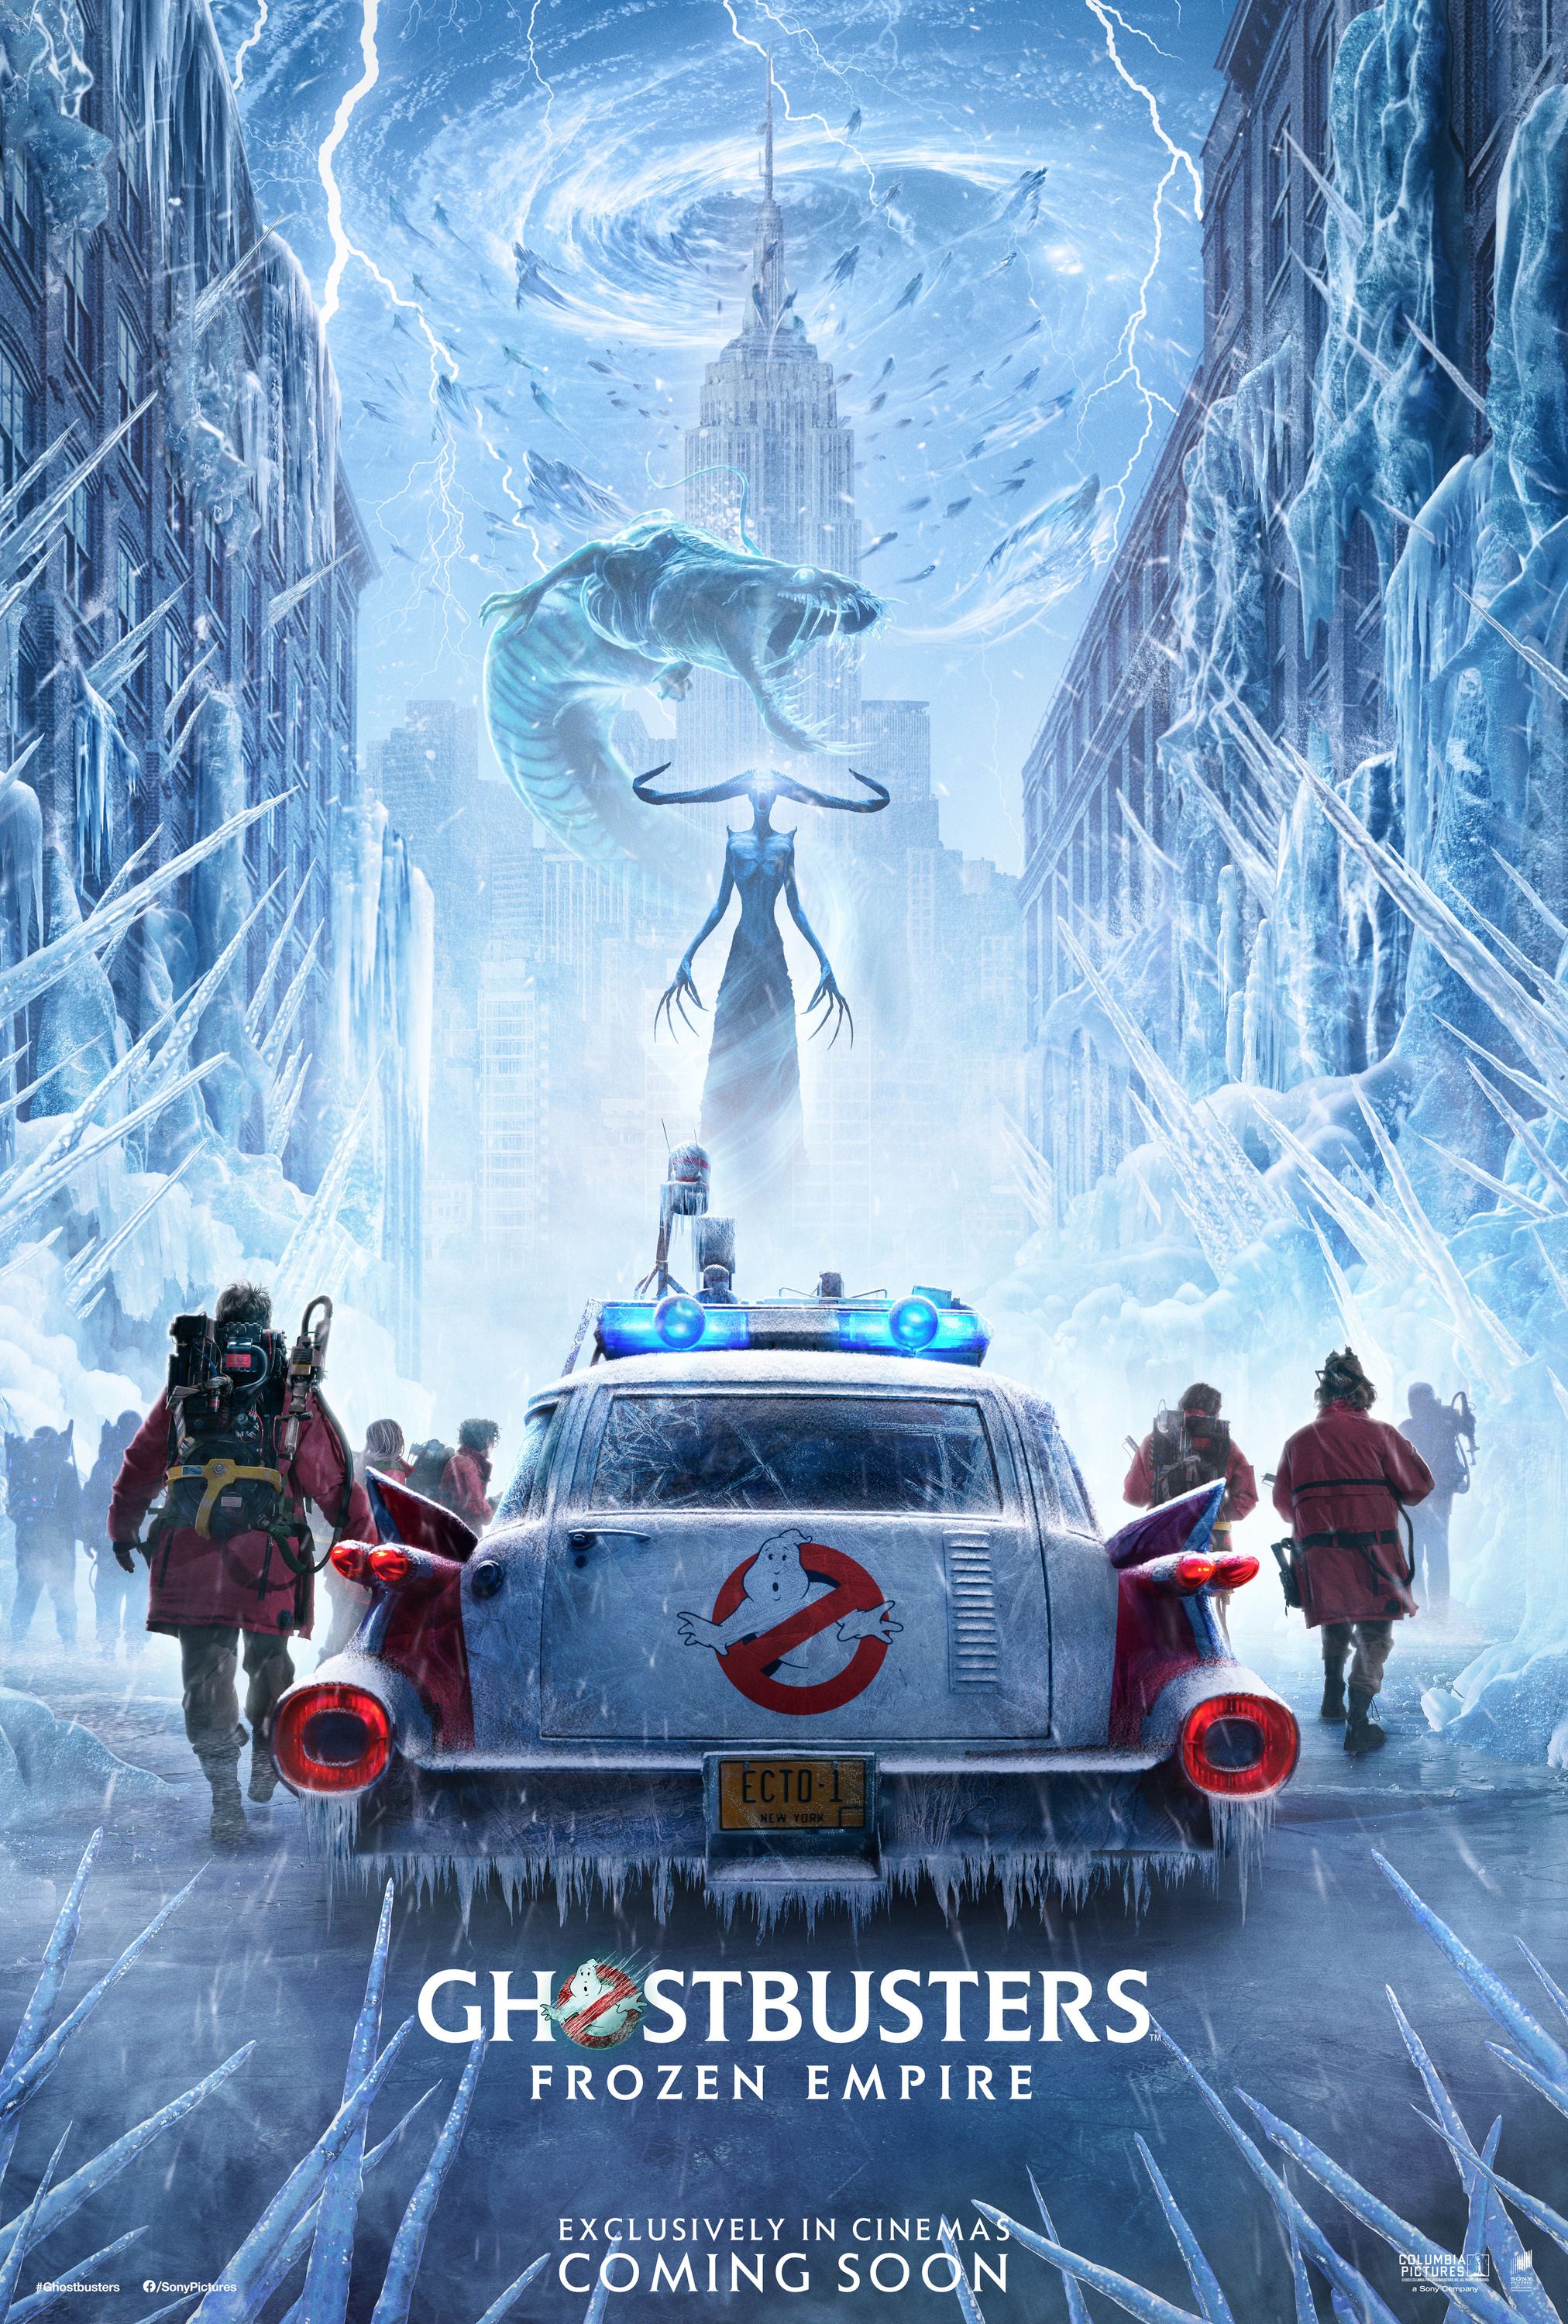 New 'Ghostbusters Frozen Empire' 4DX Poster Puts Regal Cinemas on Ice